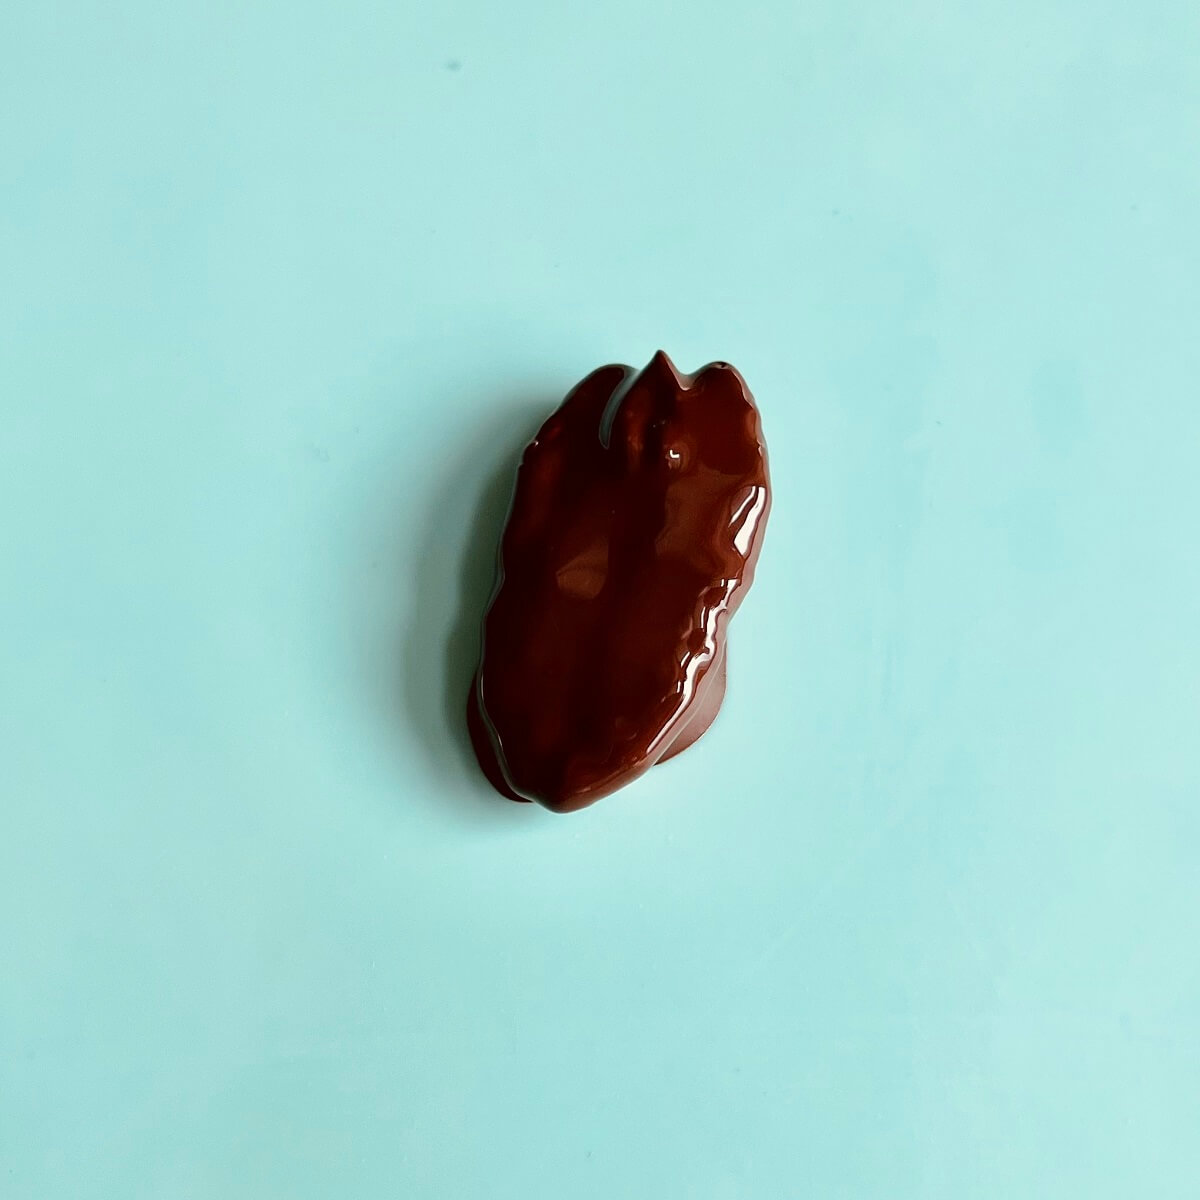 One pecan half covered in wet melted chocolate.